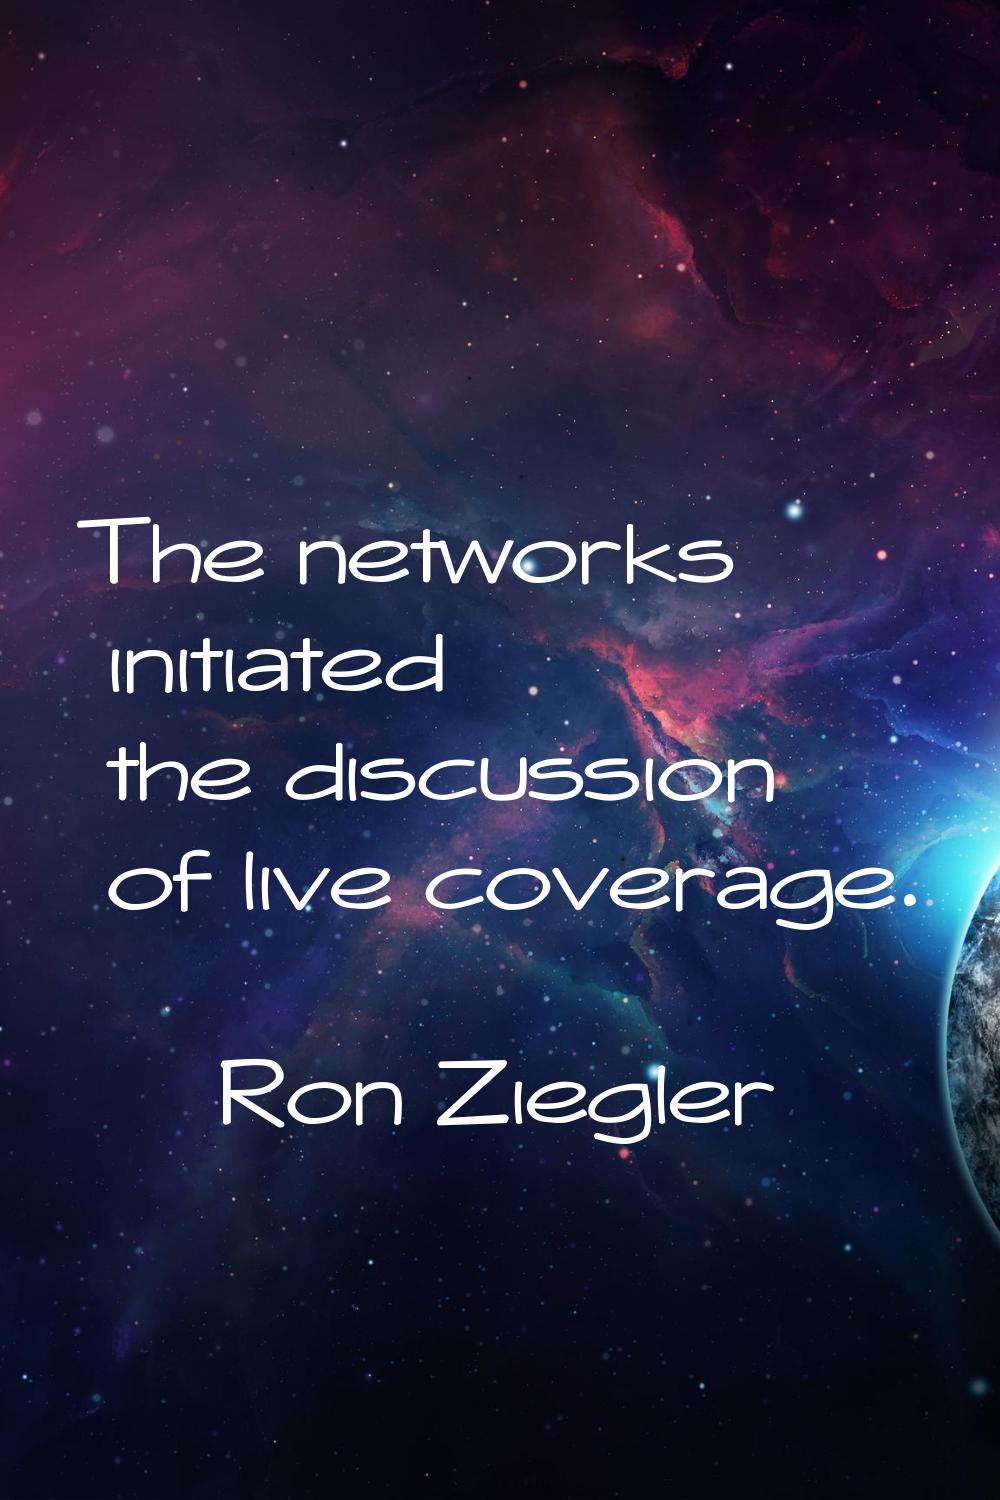 The networks initiated the discussion of live coverage.